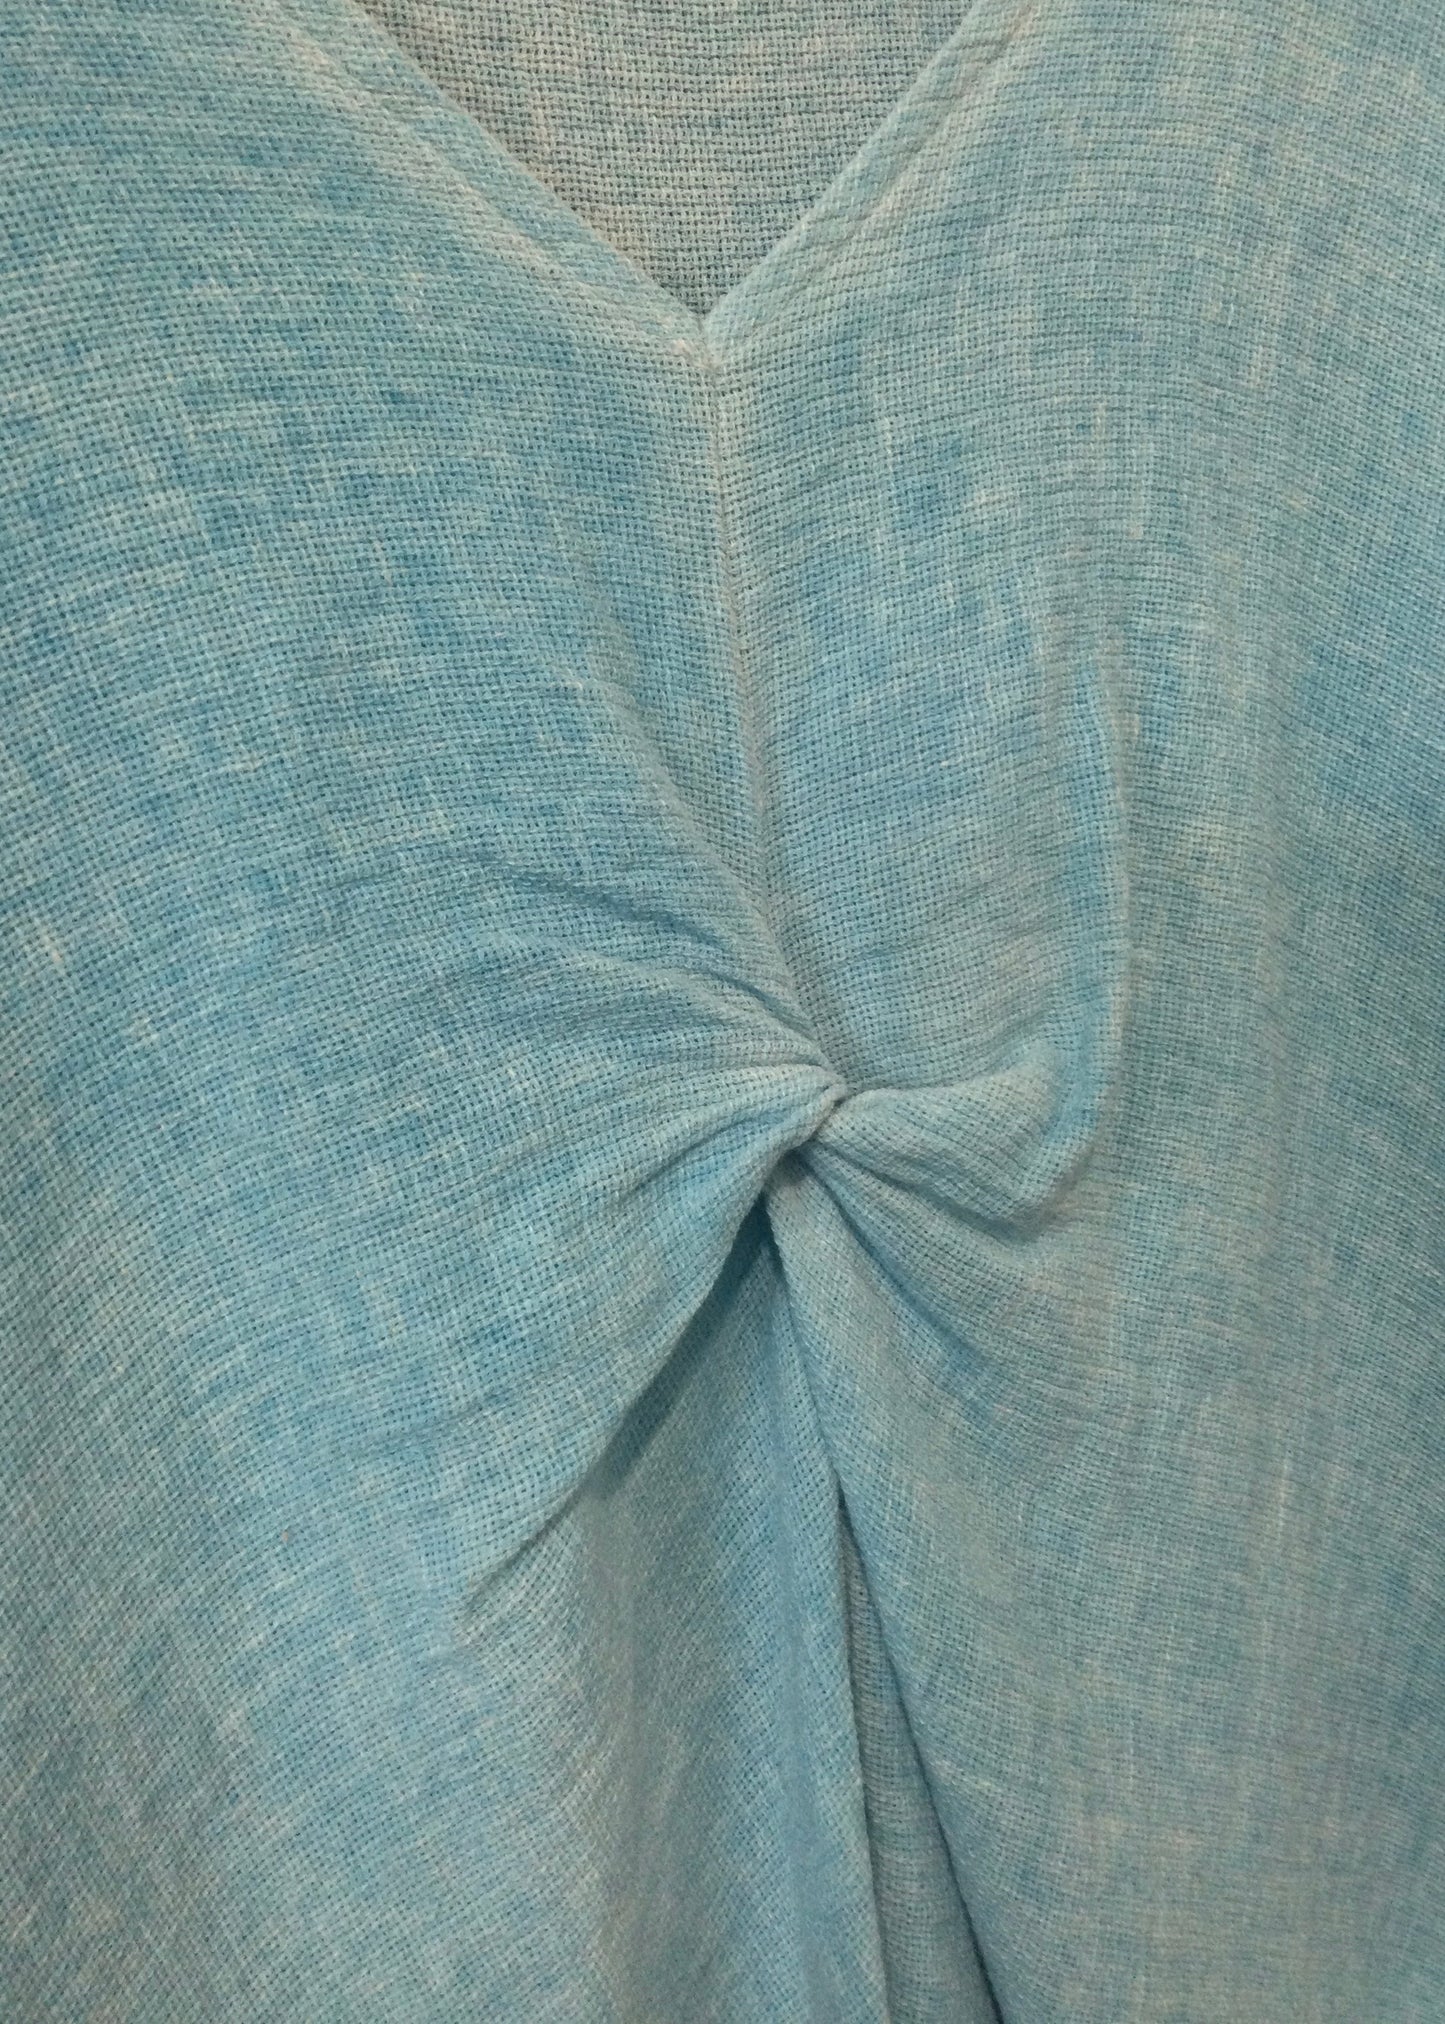 Sands - Washed Linen Ruched Top / Turquoise